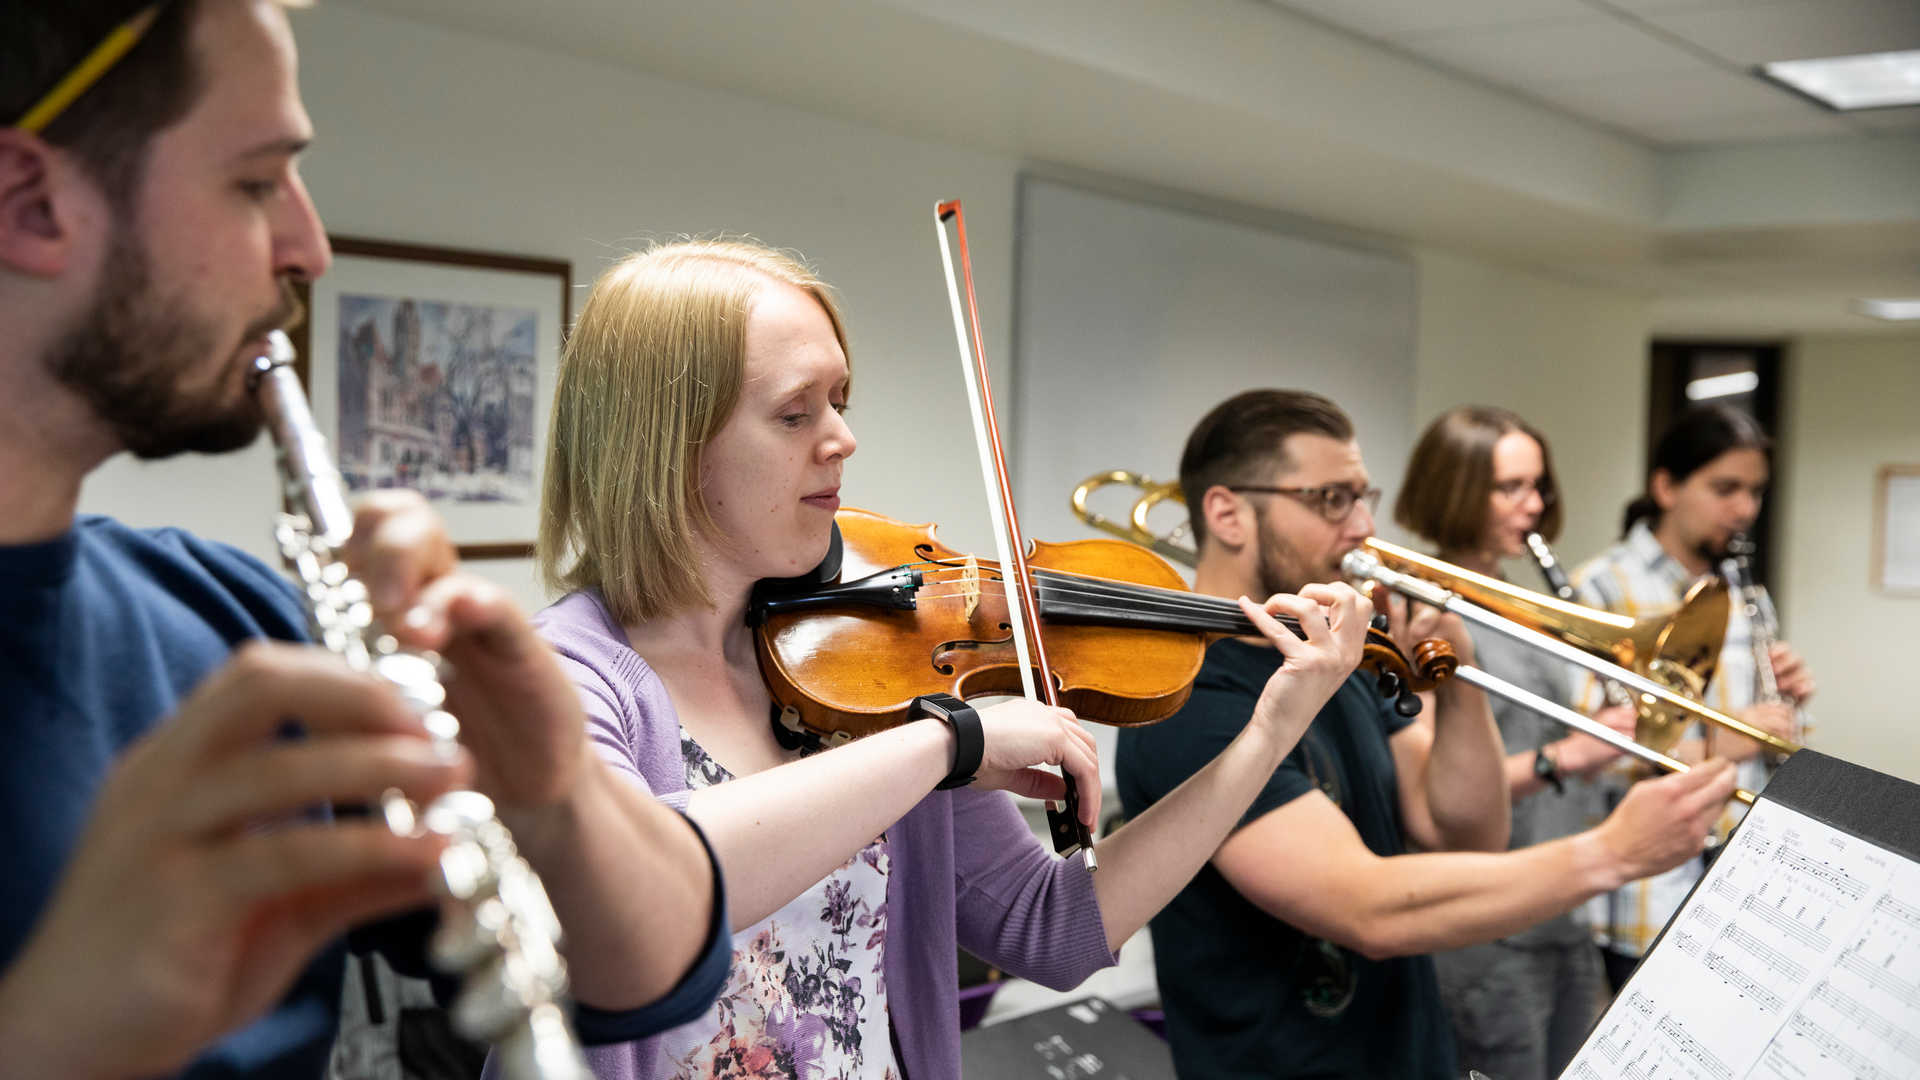 Students play instruments during a class.